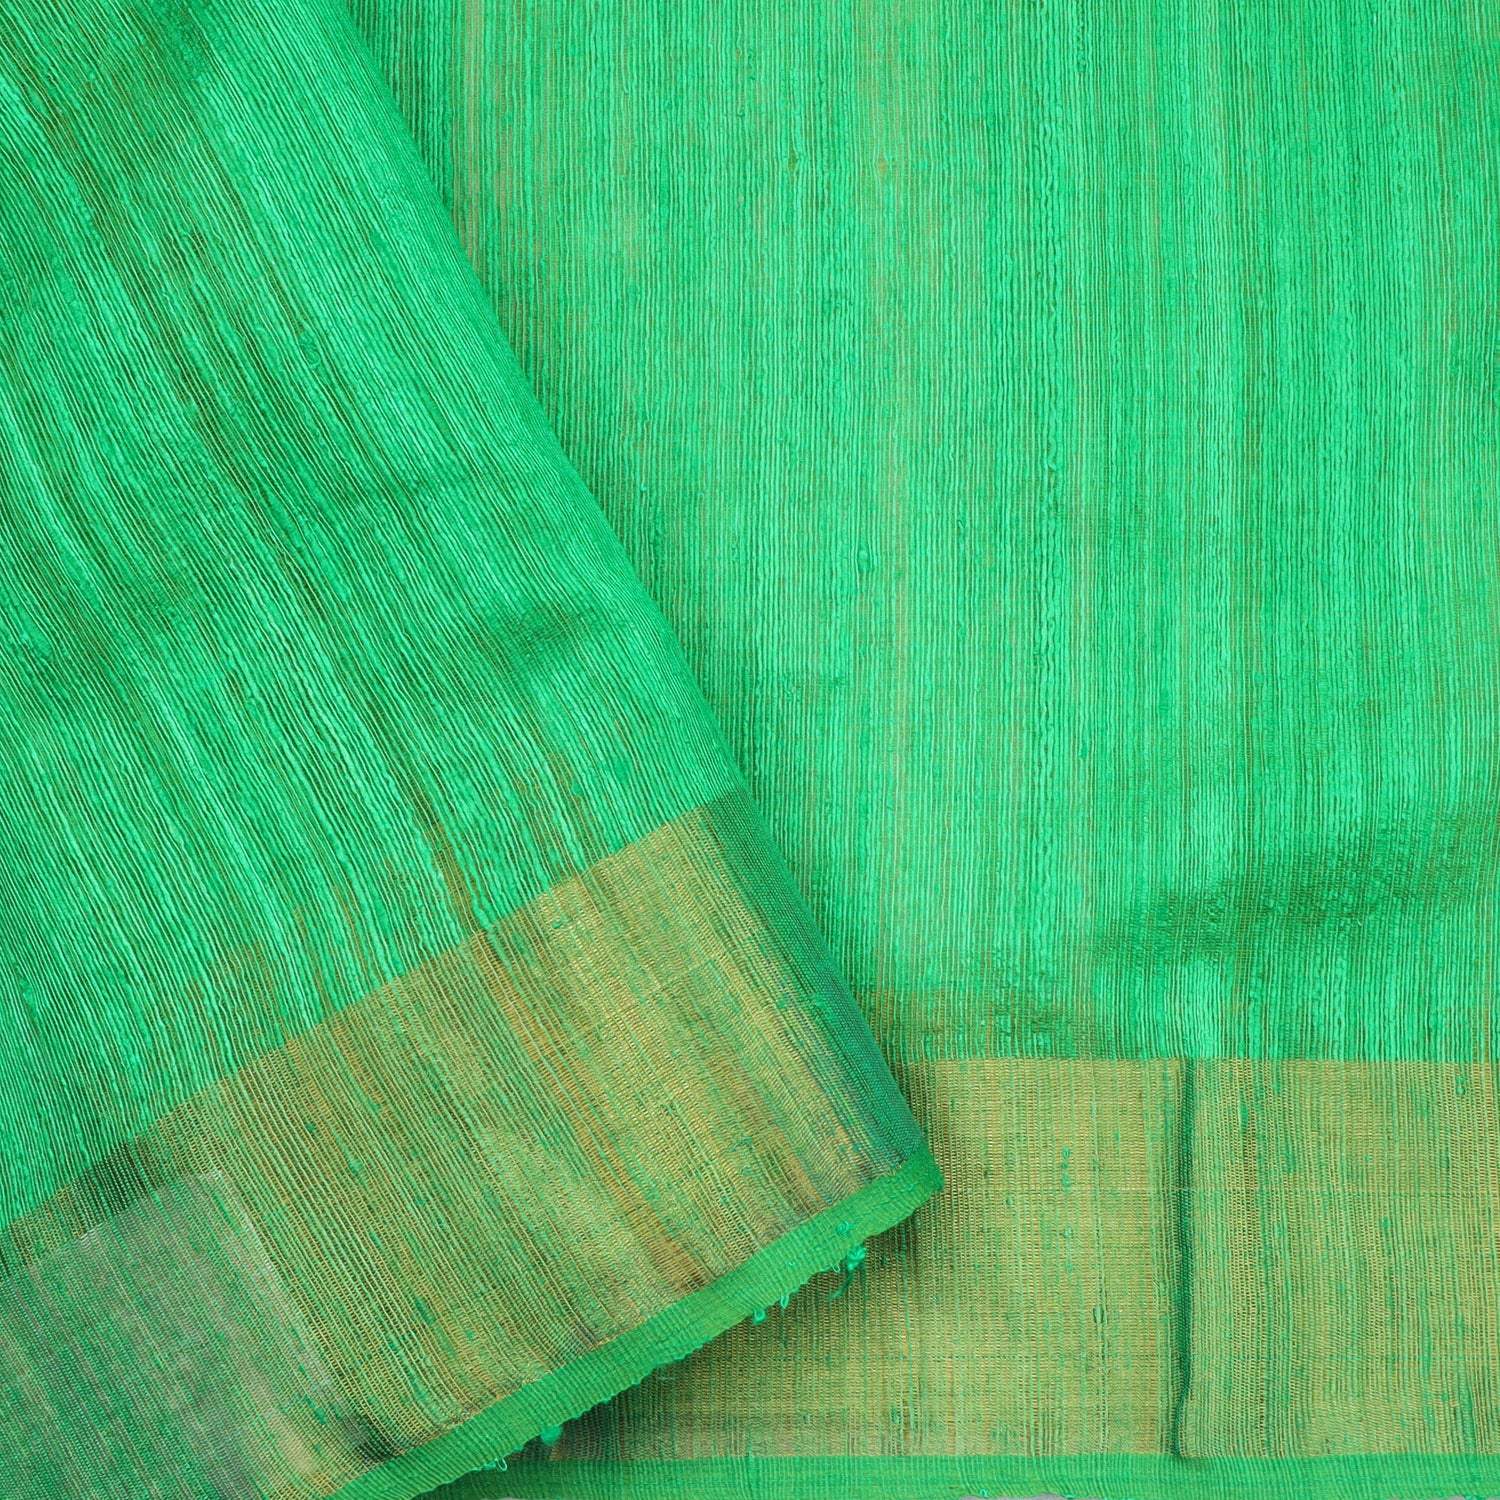 Vibrant Green Matka Silk Saree With Sequin Embroidery - Singhania's